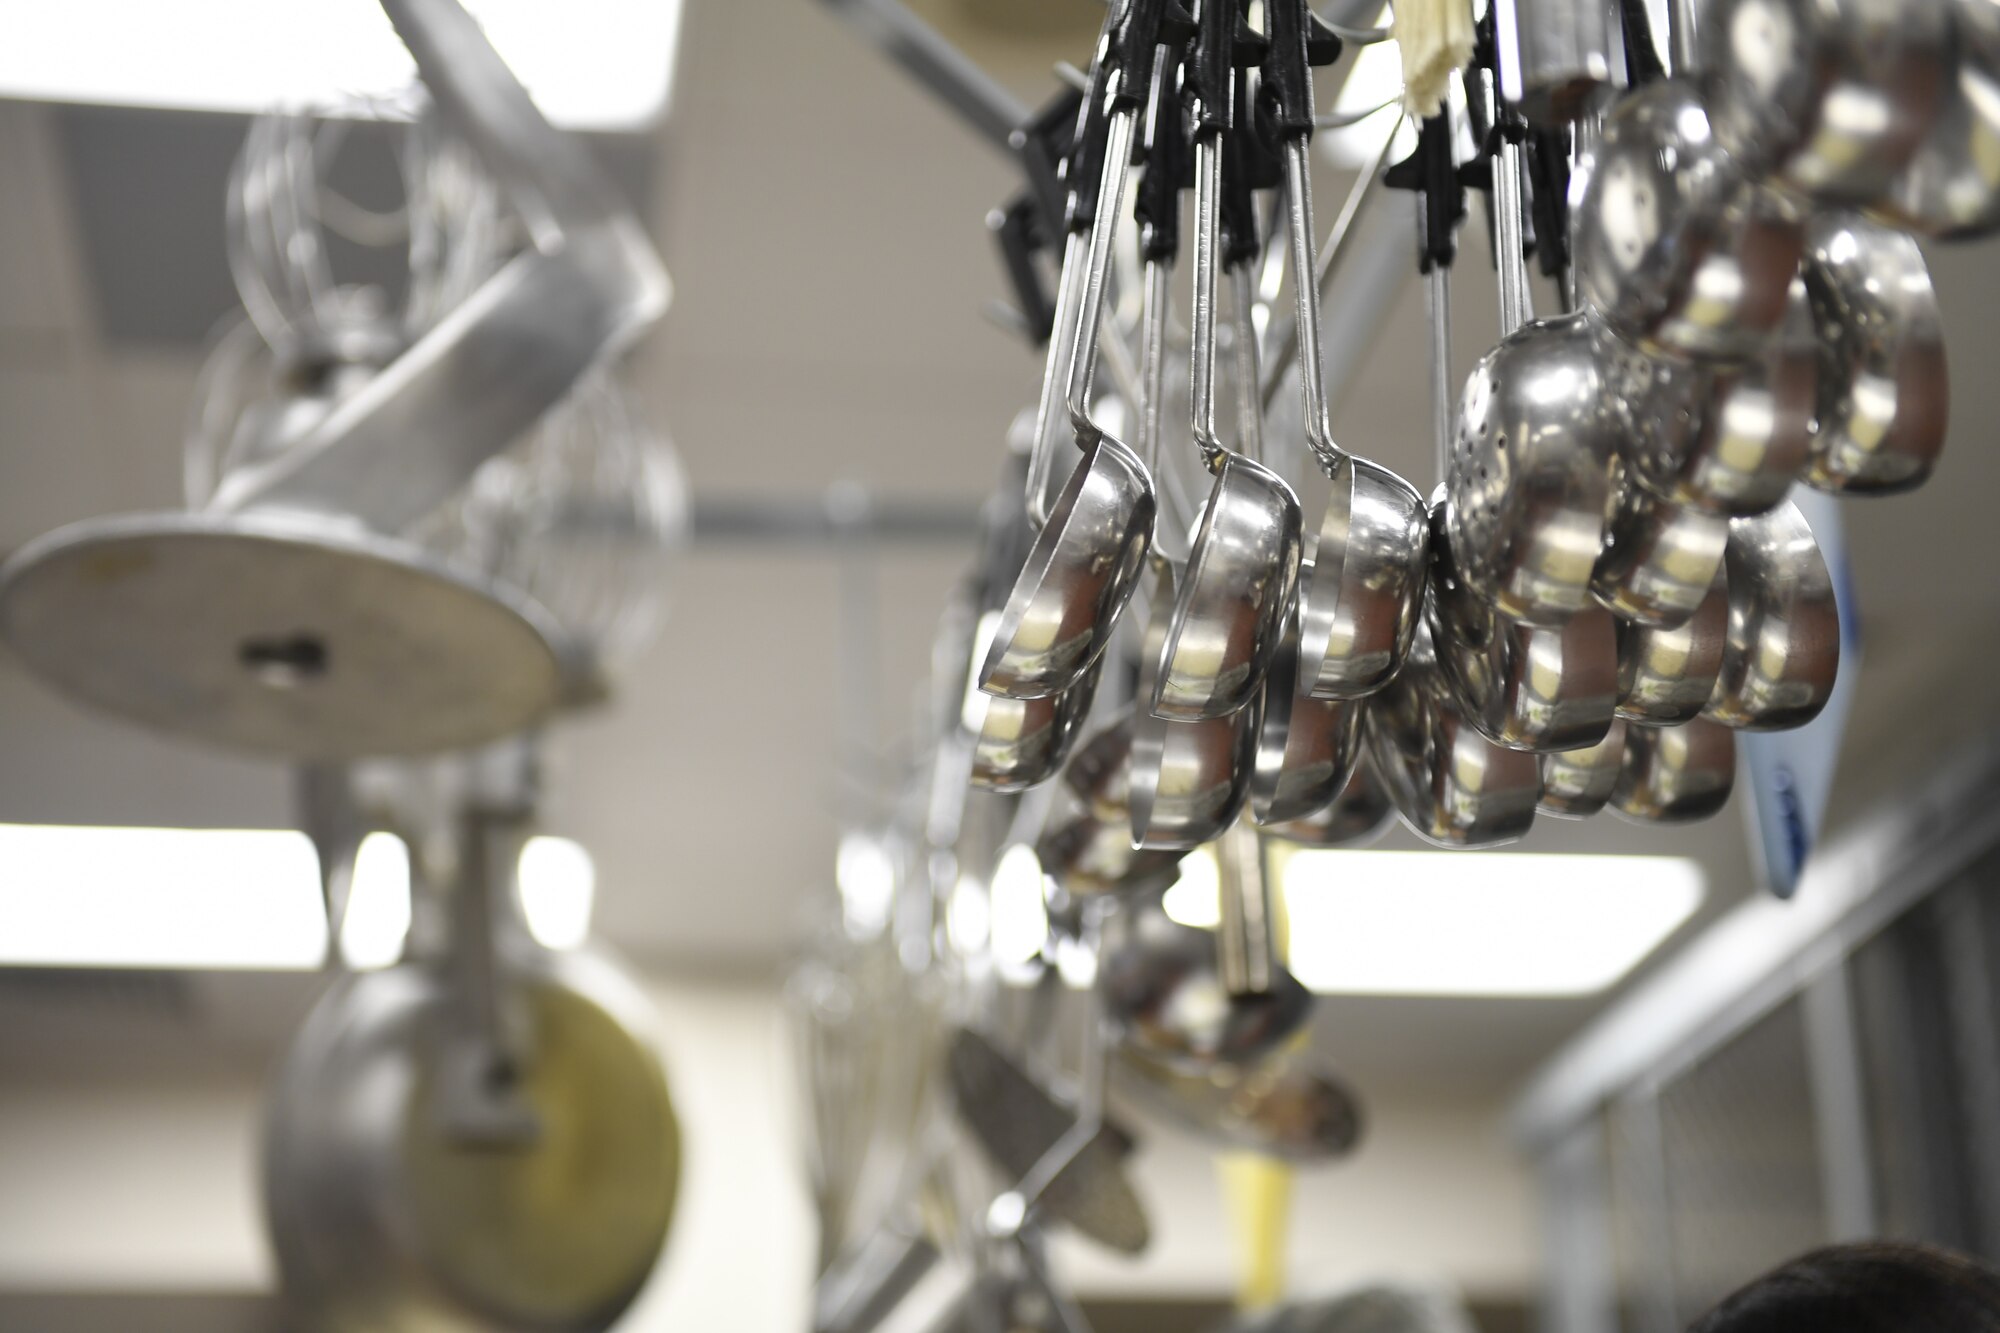 Kitchen utensils hang from a kitchen rack in the dining facility at the North Carolina Air National Guard Base, Charlotte Douglas International Airport, Jan. 12, 2019. Food services Airmen from the North Carolina Air National Guard train members from the Niagara Falls Air Reserve Station, New York, on full-service kitchen operations in preparation for the upcoming Air Force active duty and reserve Hennessy Award competition.